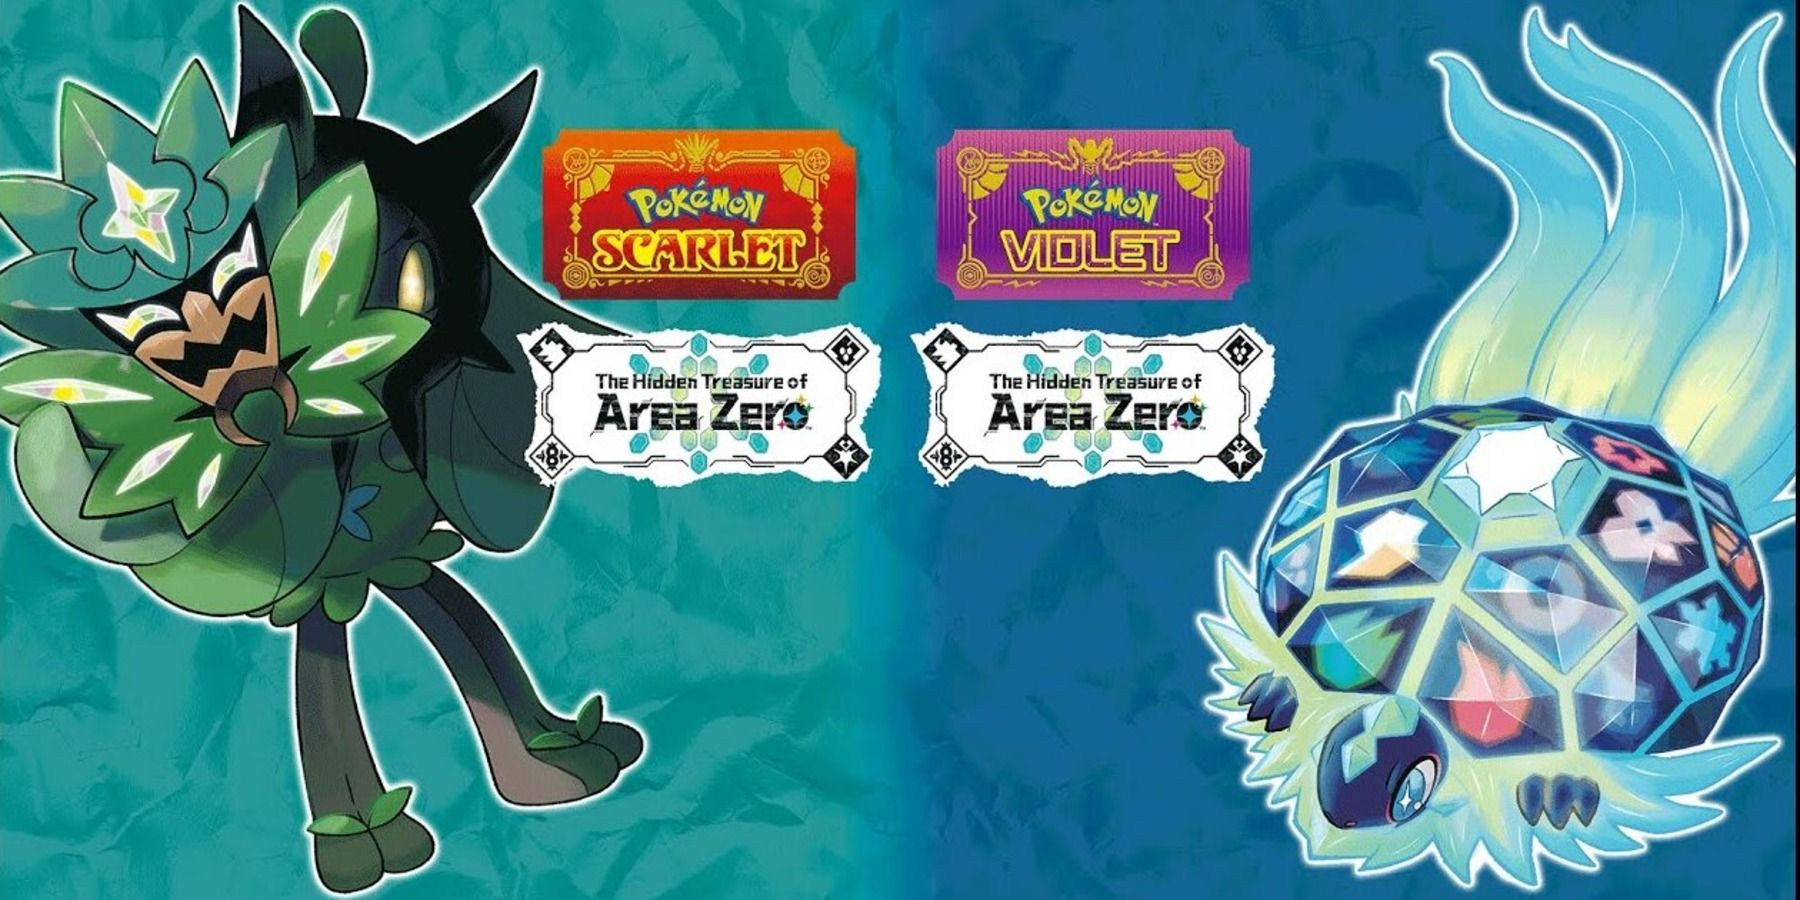 The poster Pokemon for the Teal Mask and Indigo Disk expansions, part of Pokemon Scarlet and Violet's DLC, The Hidden Treasure of Area Zero.